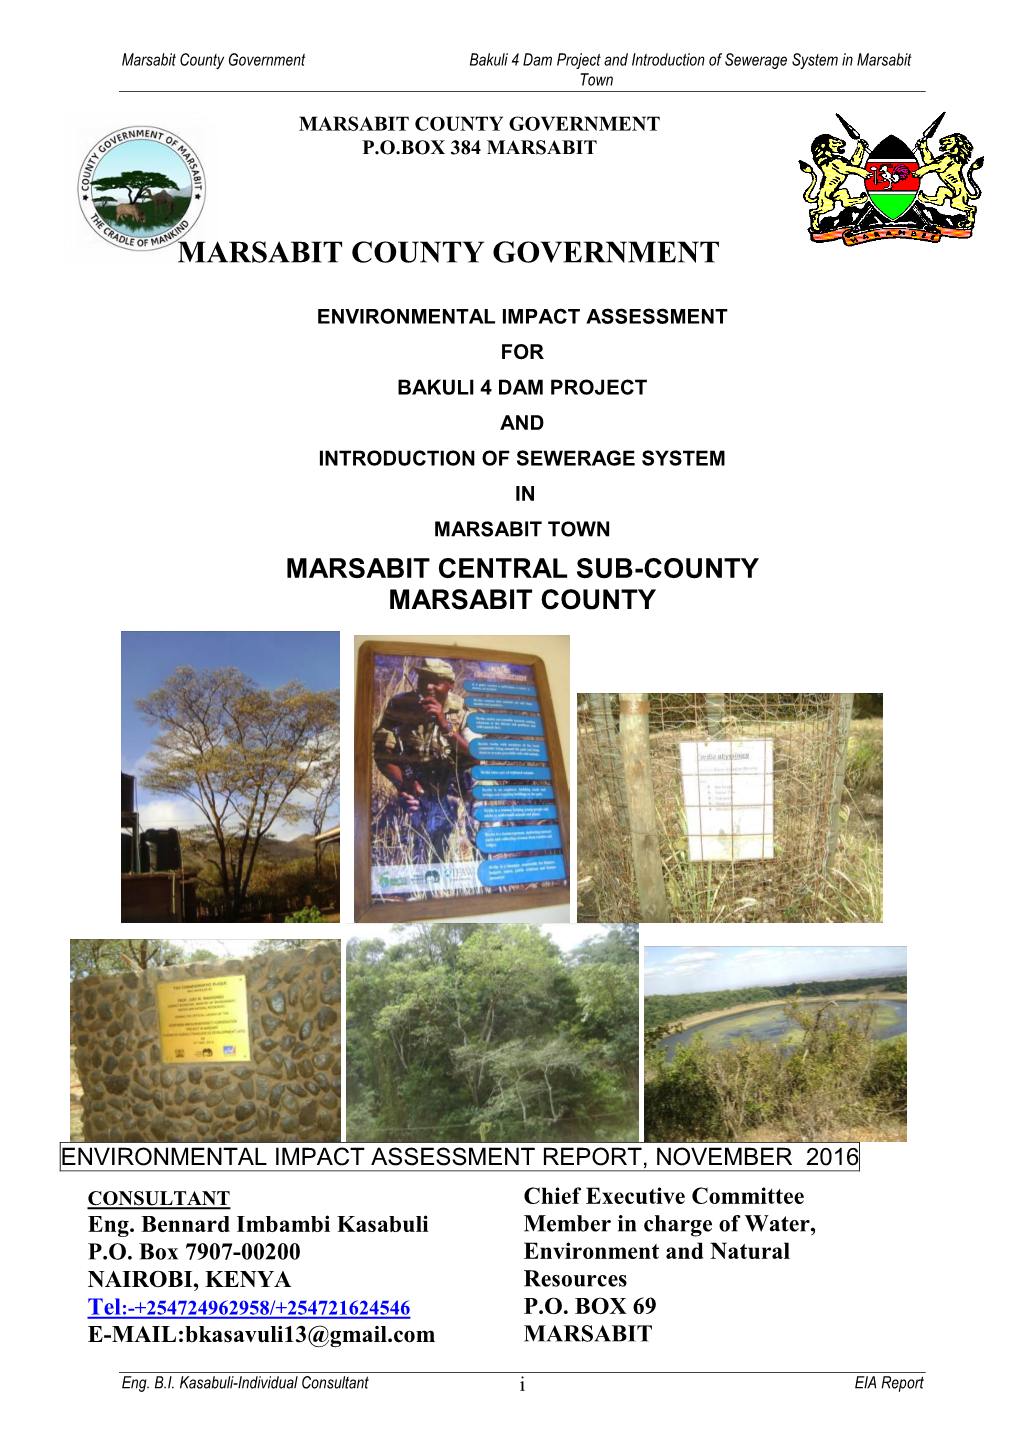 Marsabit County Government Bakuli 4 Dam Project and Introduction of Sewerage System in Marsabit Town